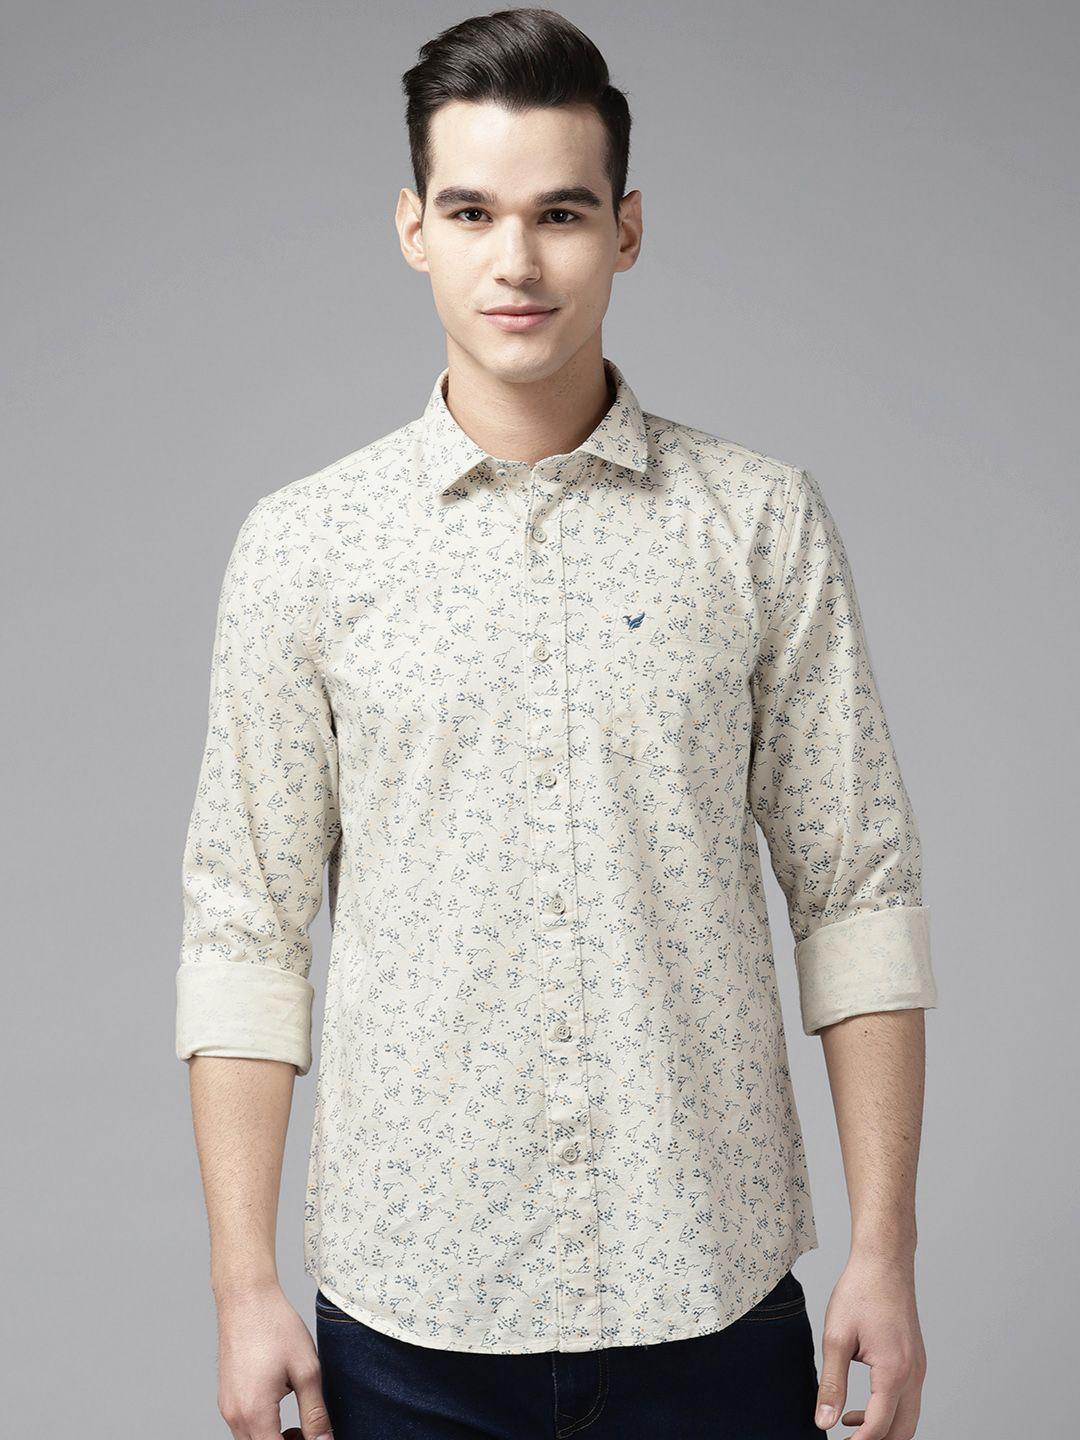 blackberrys printed pure cotton slim fit casual shirt